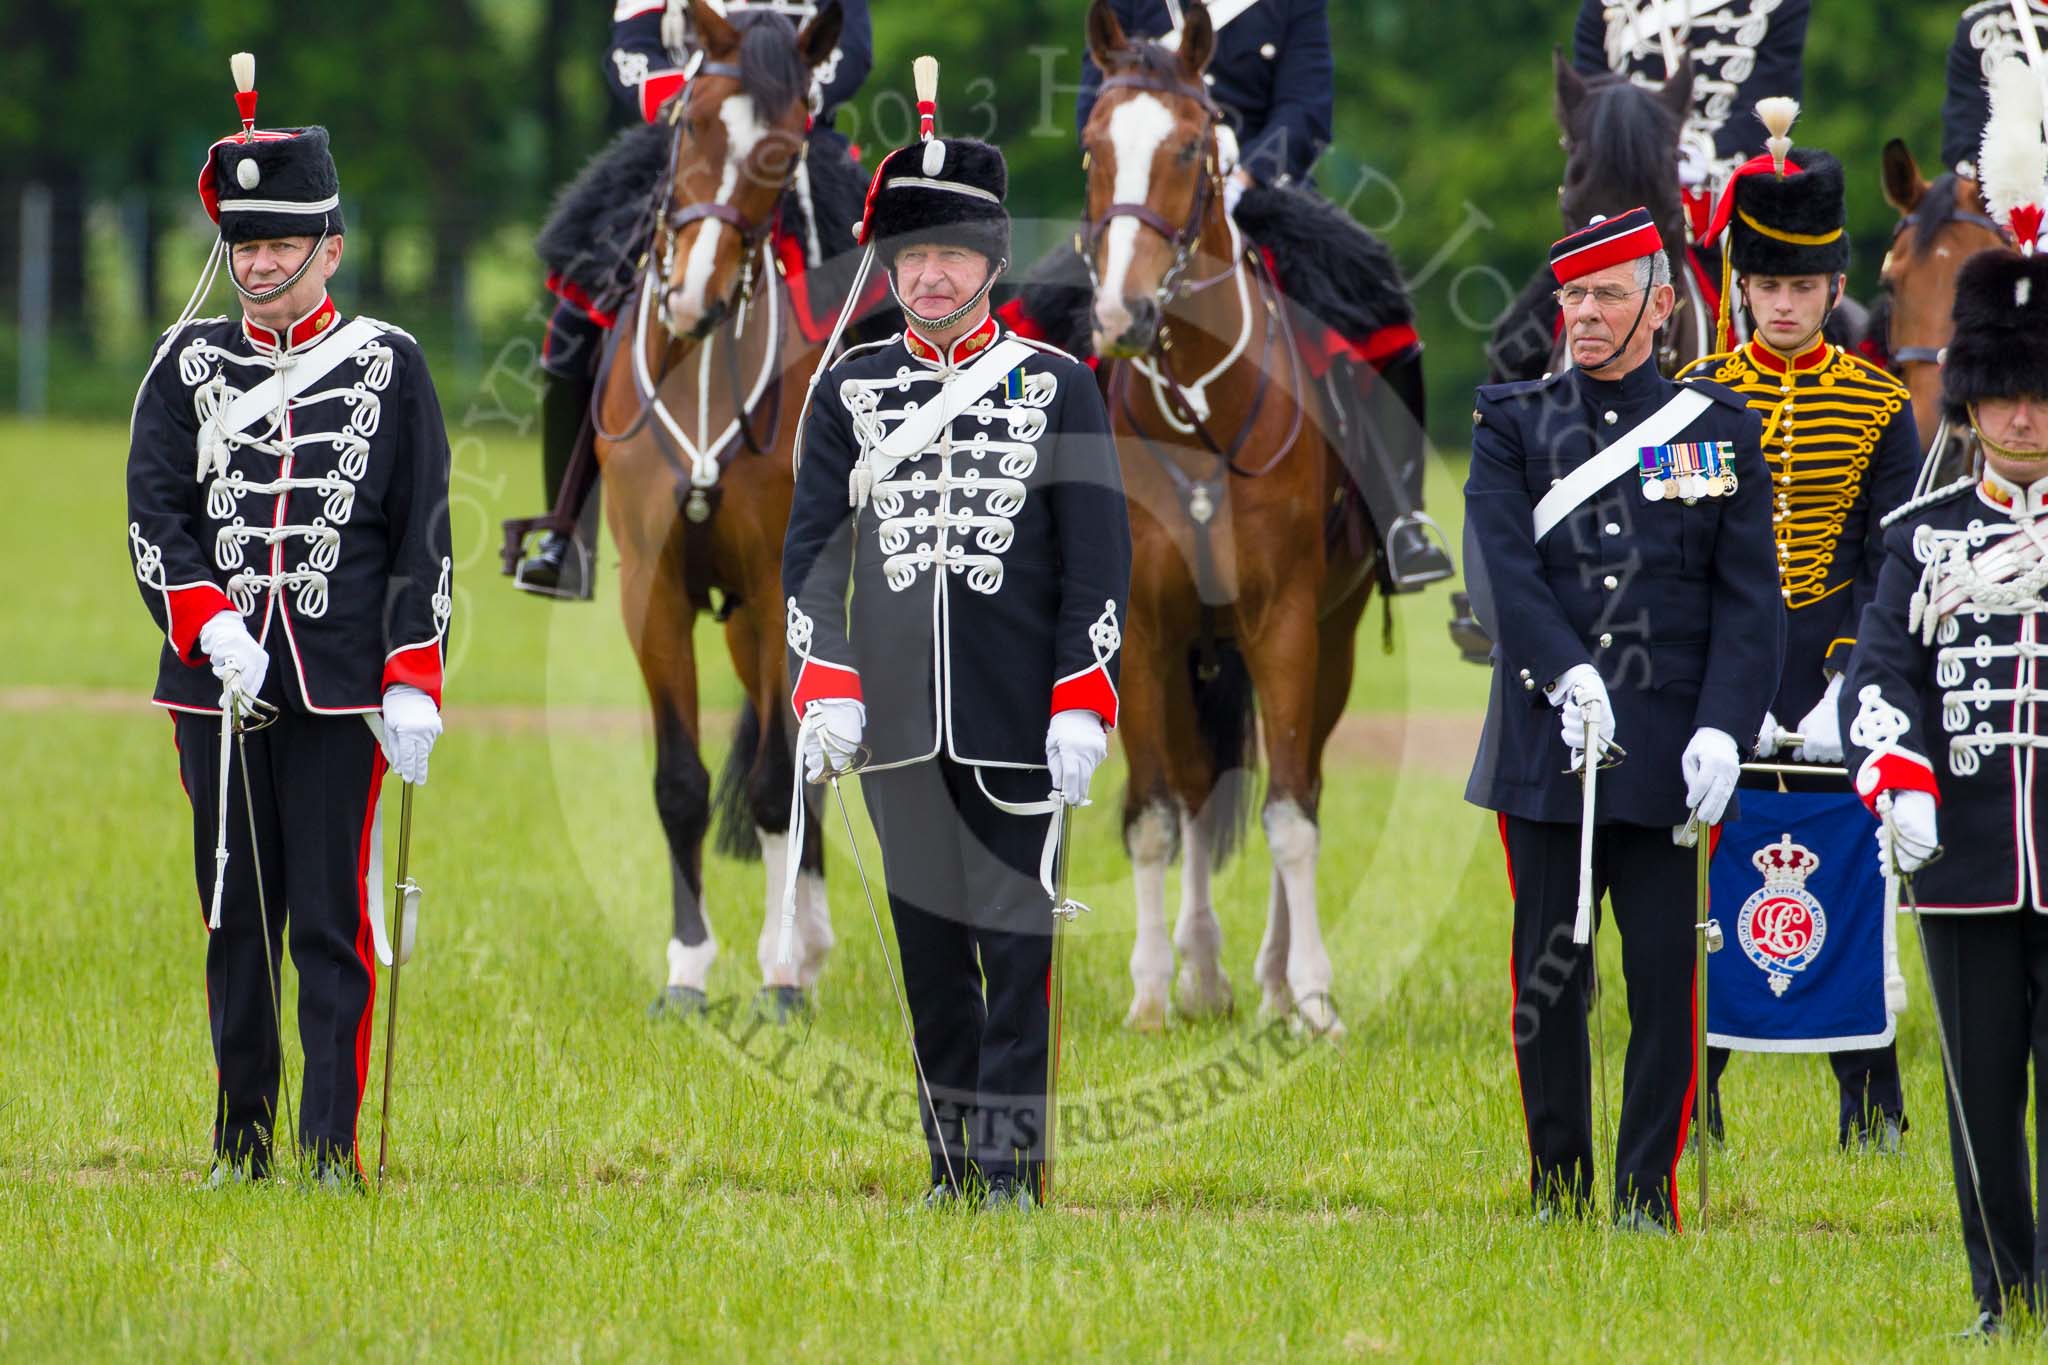 The Light Cavalry HAC Annual Review and Inspection 2013.
Windsor Great Park Review Ground,
Windsor,
Berkshire,
United Kingdom,
on 09 June 2013 at 13:06, image #313